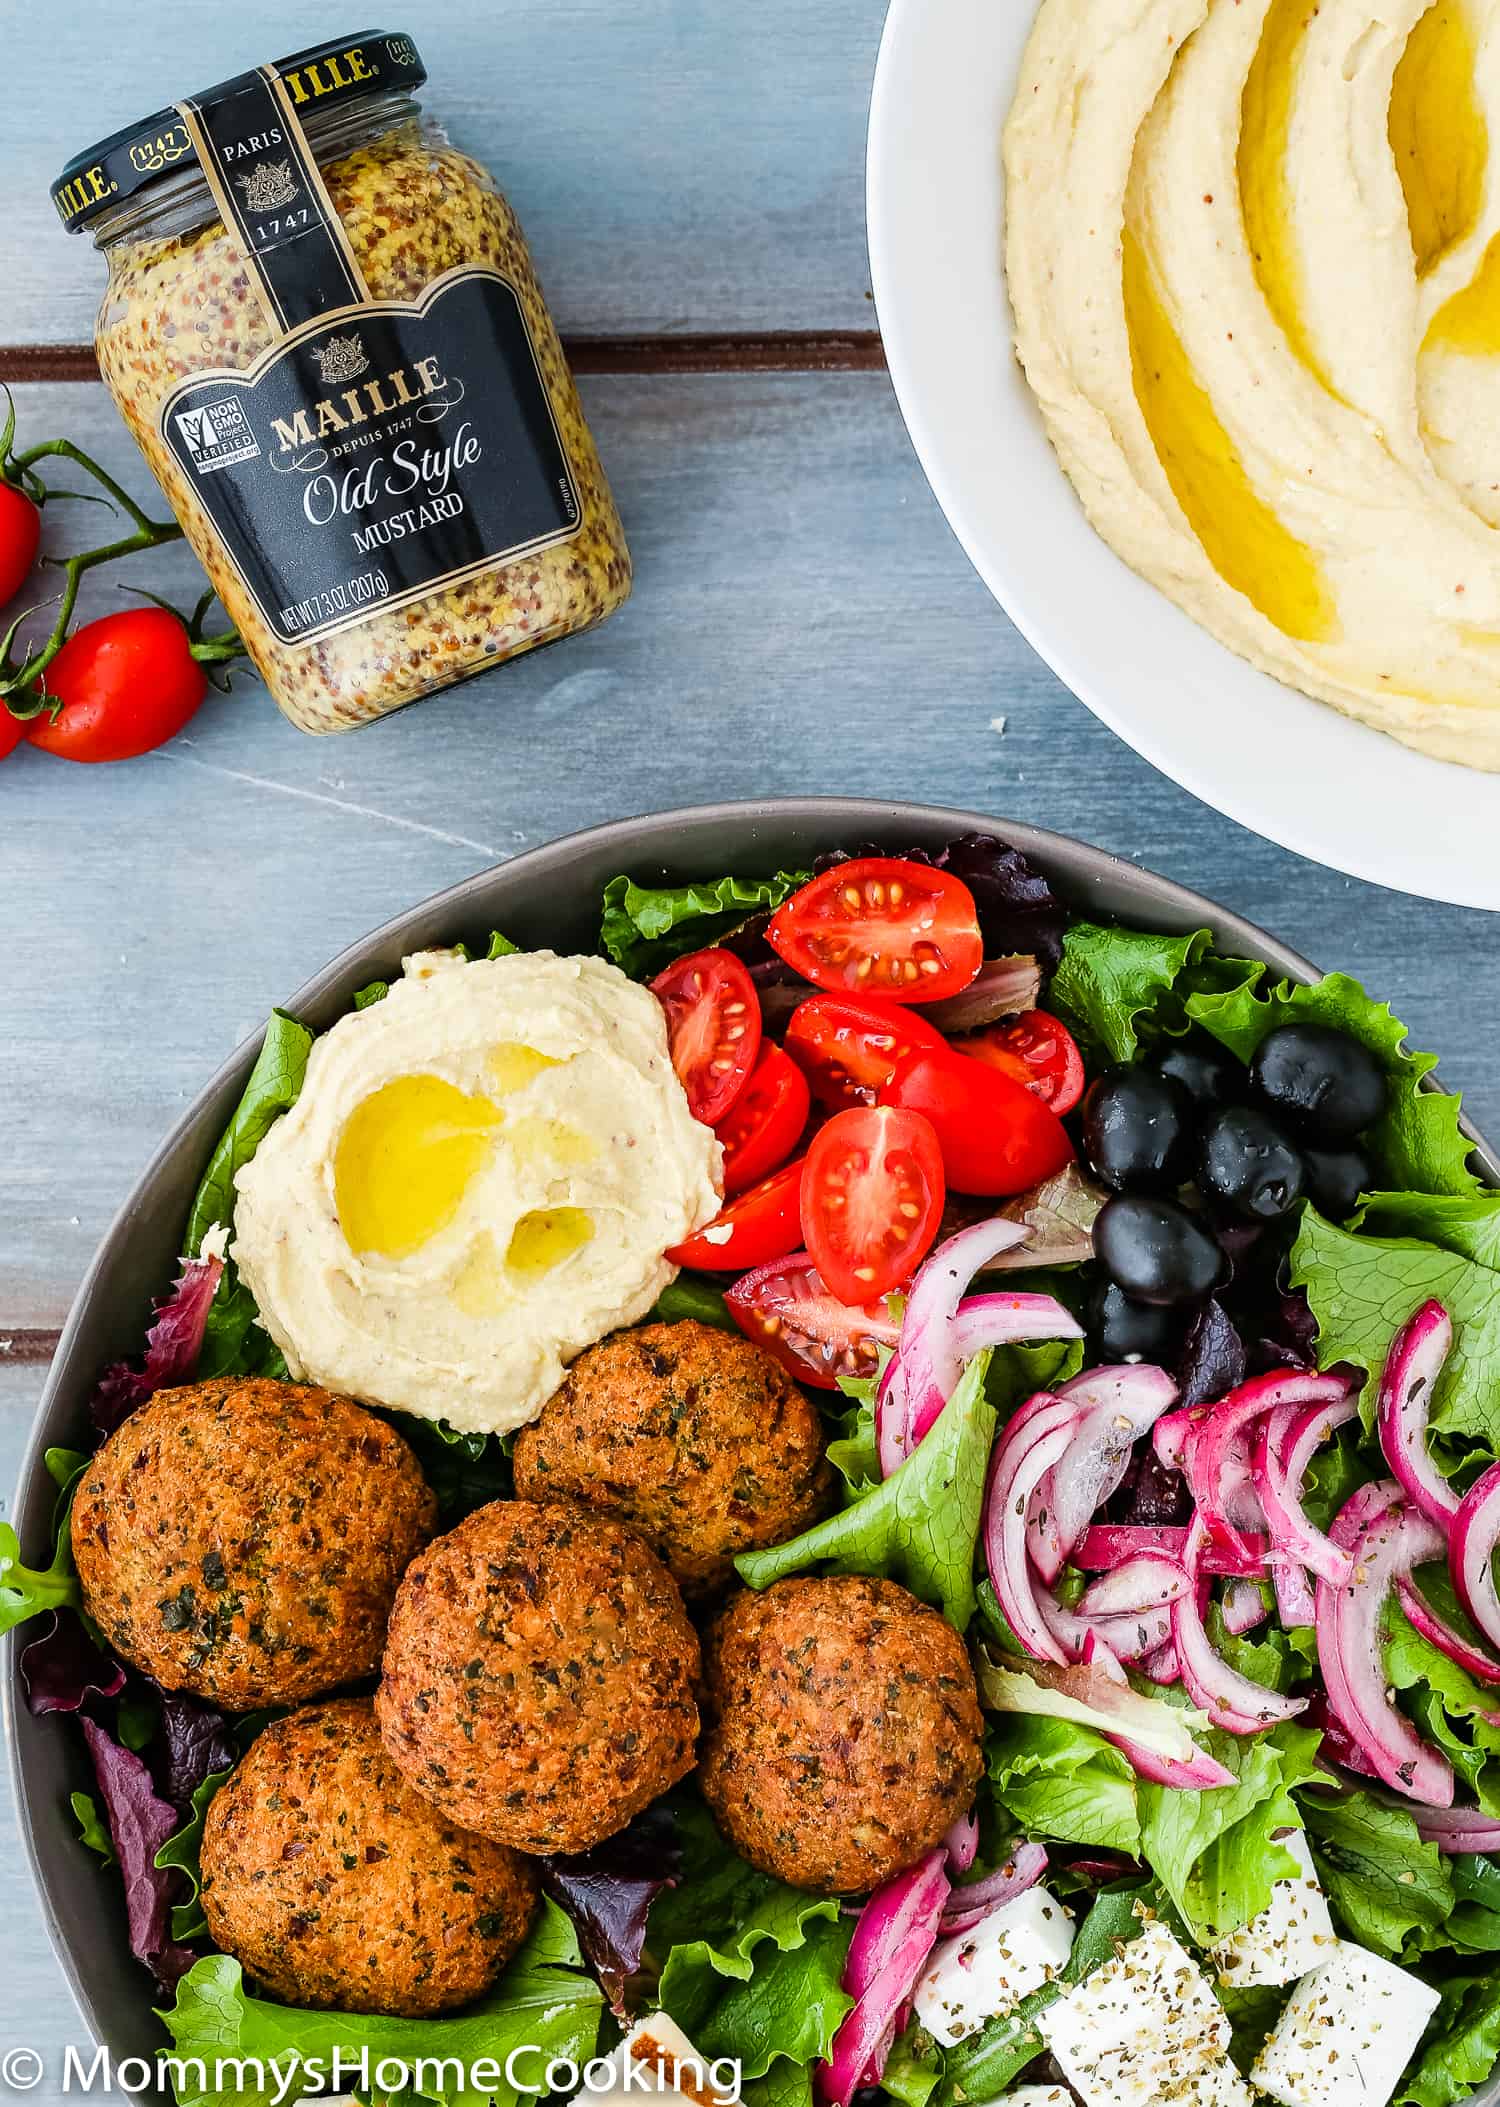 Falafel Salad Bowls with Mustard Hummus - Mommy's Home Cooking